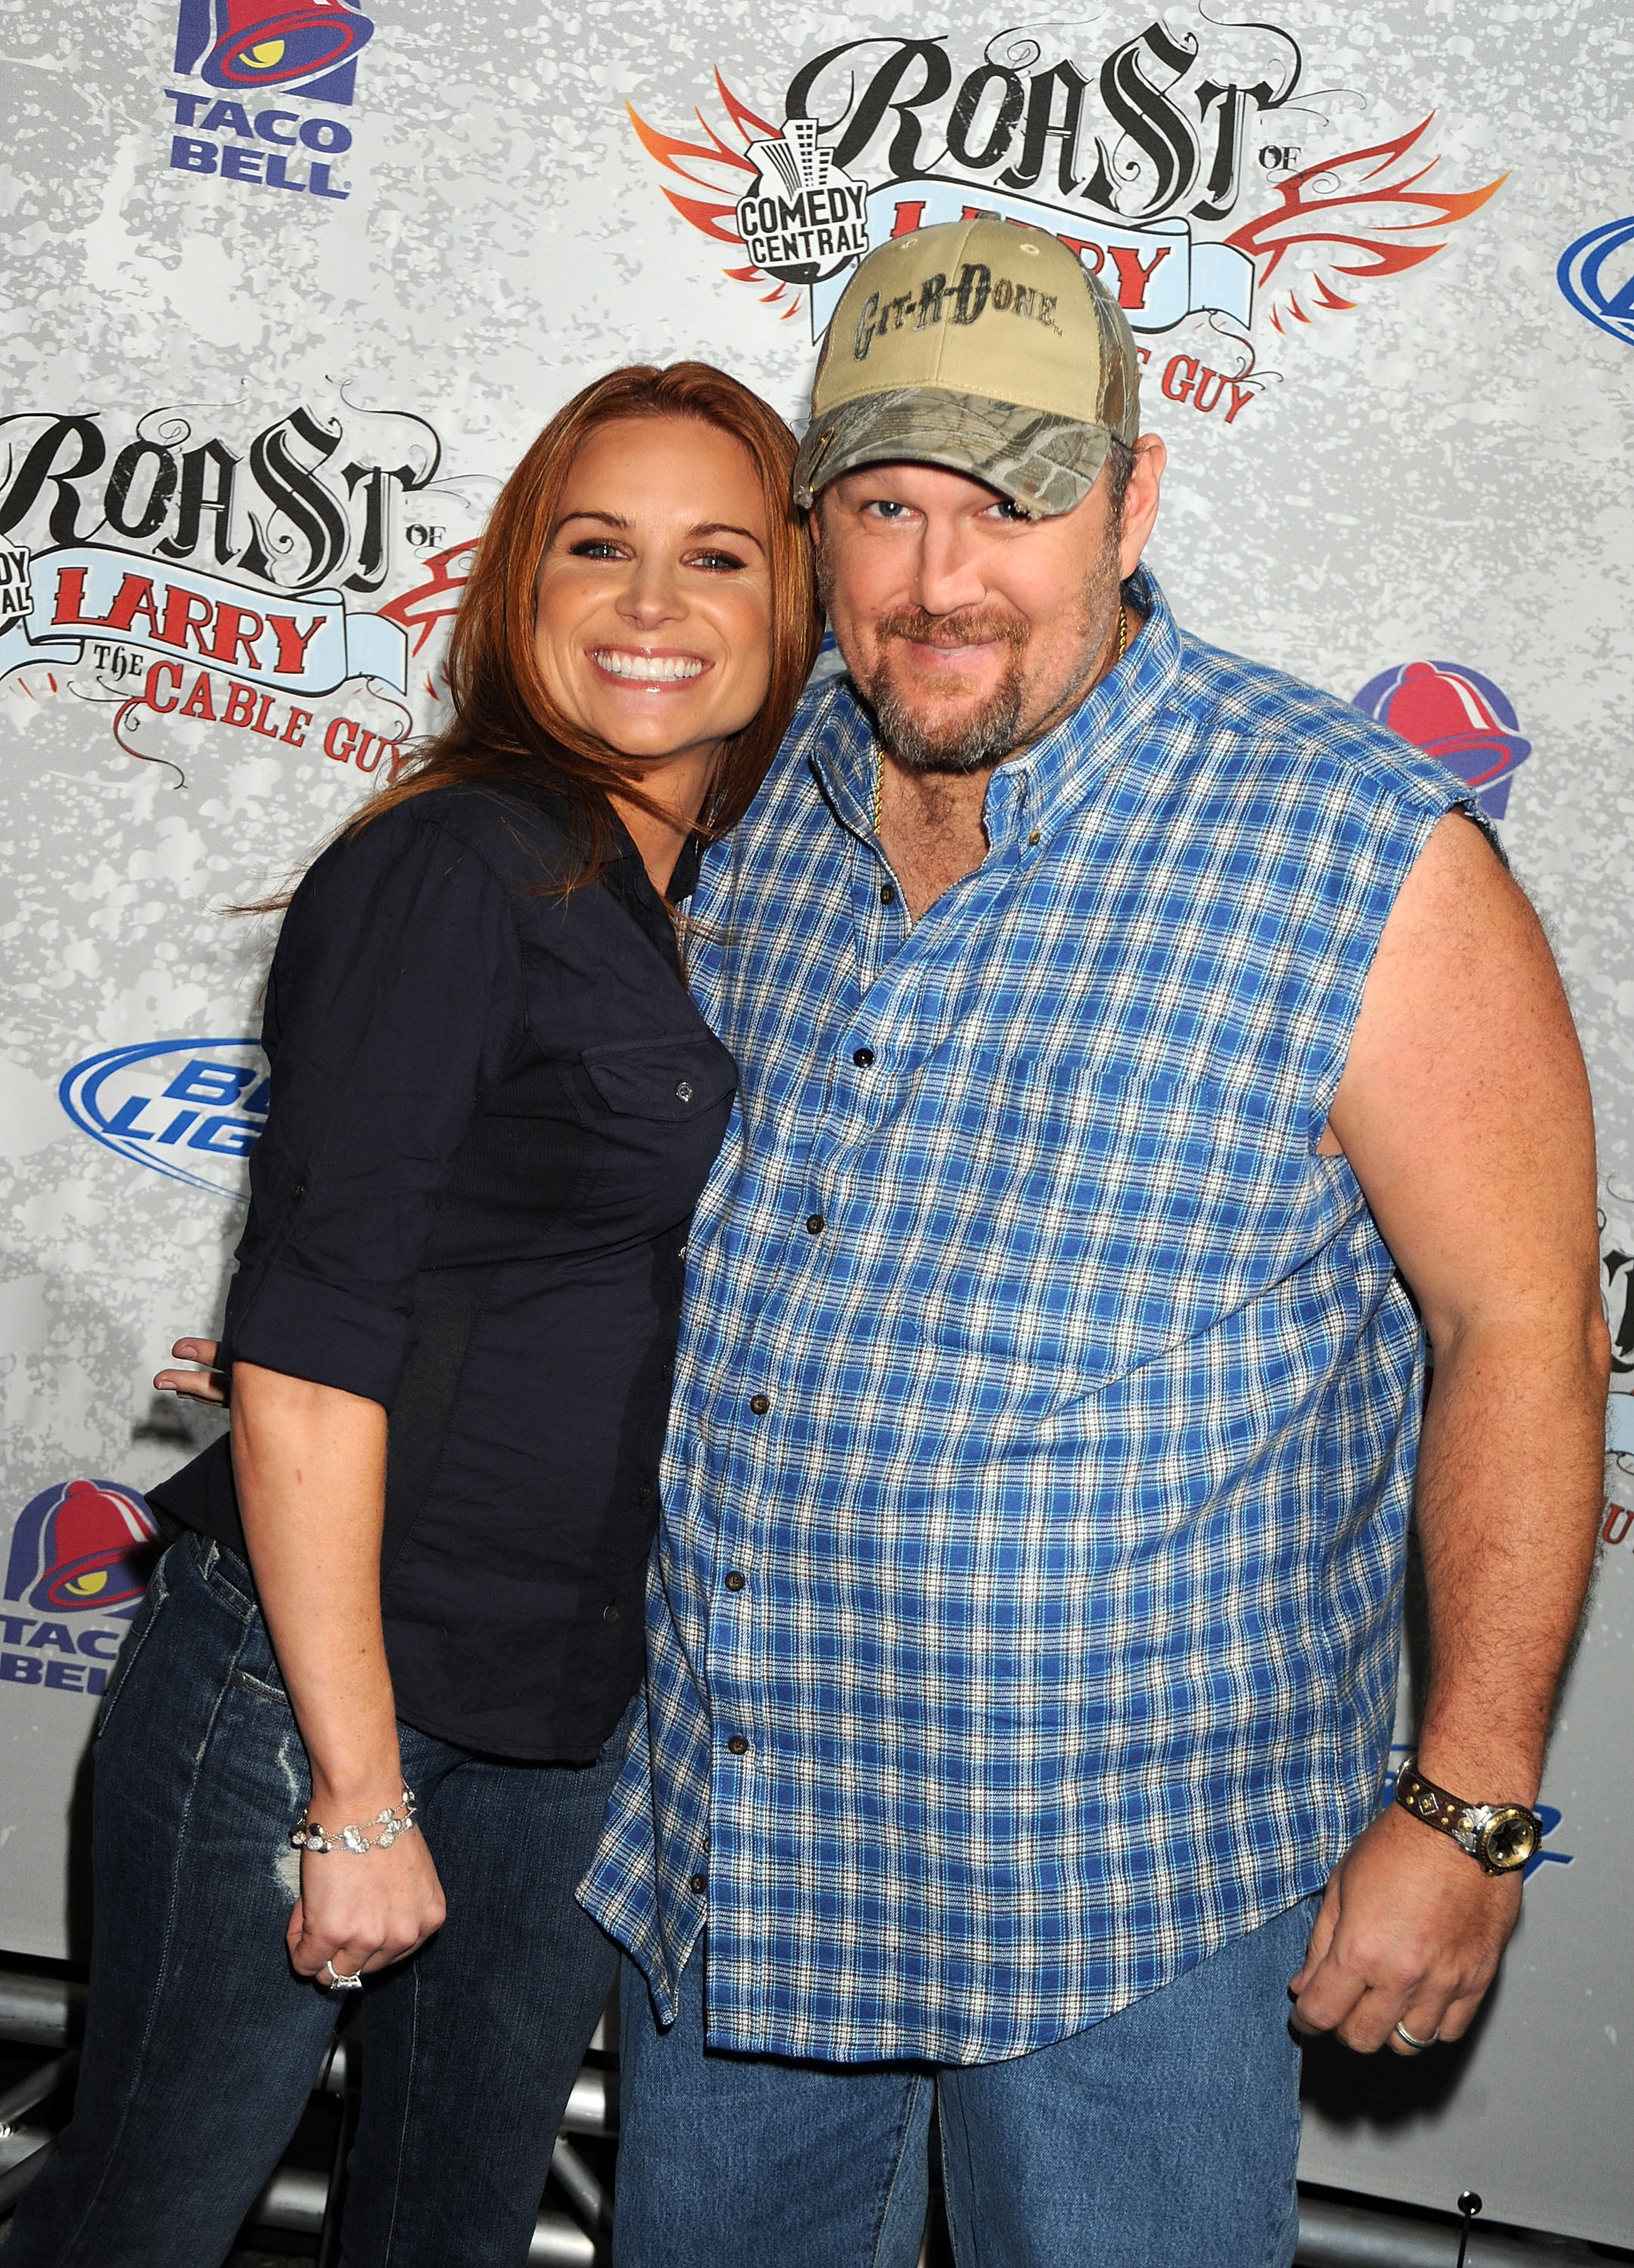 Cara Whitney and Larry The Cable Guy attend Comedy Central's Roast of Larry the Cable Guy at The Warner Brothers Studio Lot on March 1, 2009, in Burbank, California. | Source: Getty Images